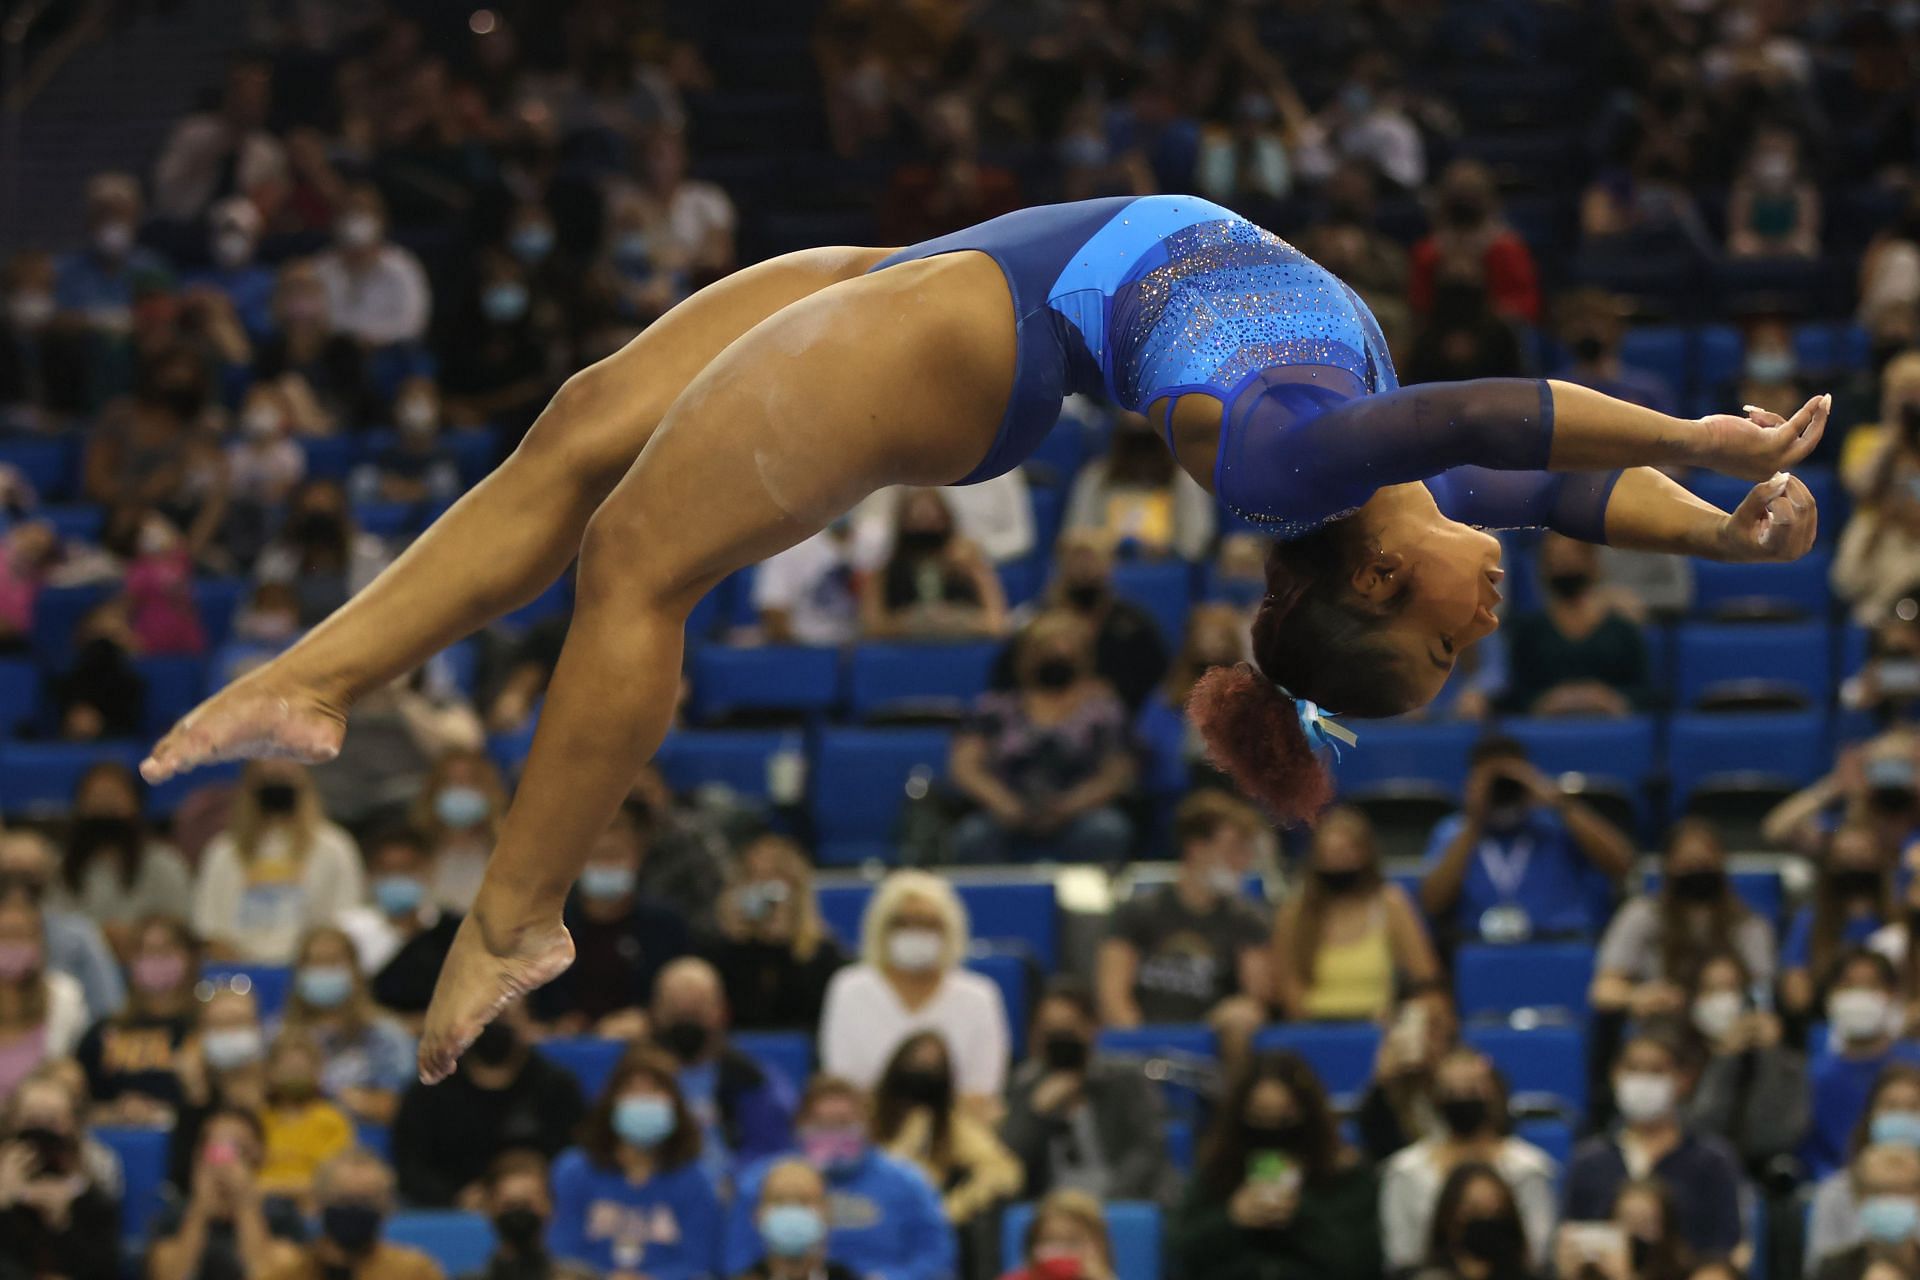 Jordan Chiles of the UCLA Bruins competes on beam against the Arizona Wildcats at UCLA Pauley Pavilion on January 30, 2022